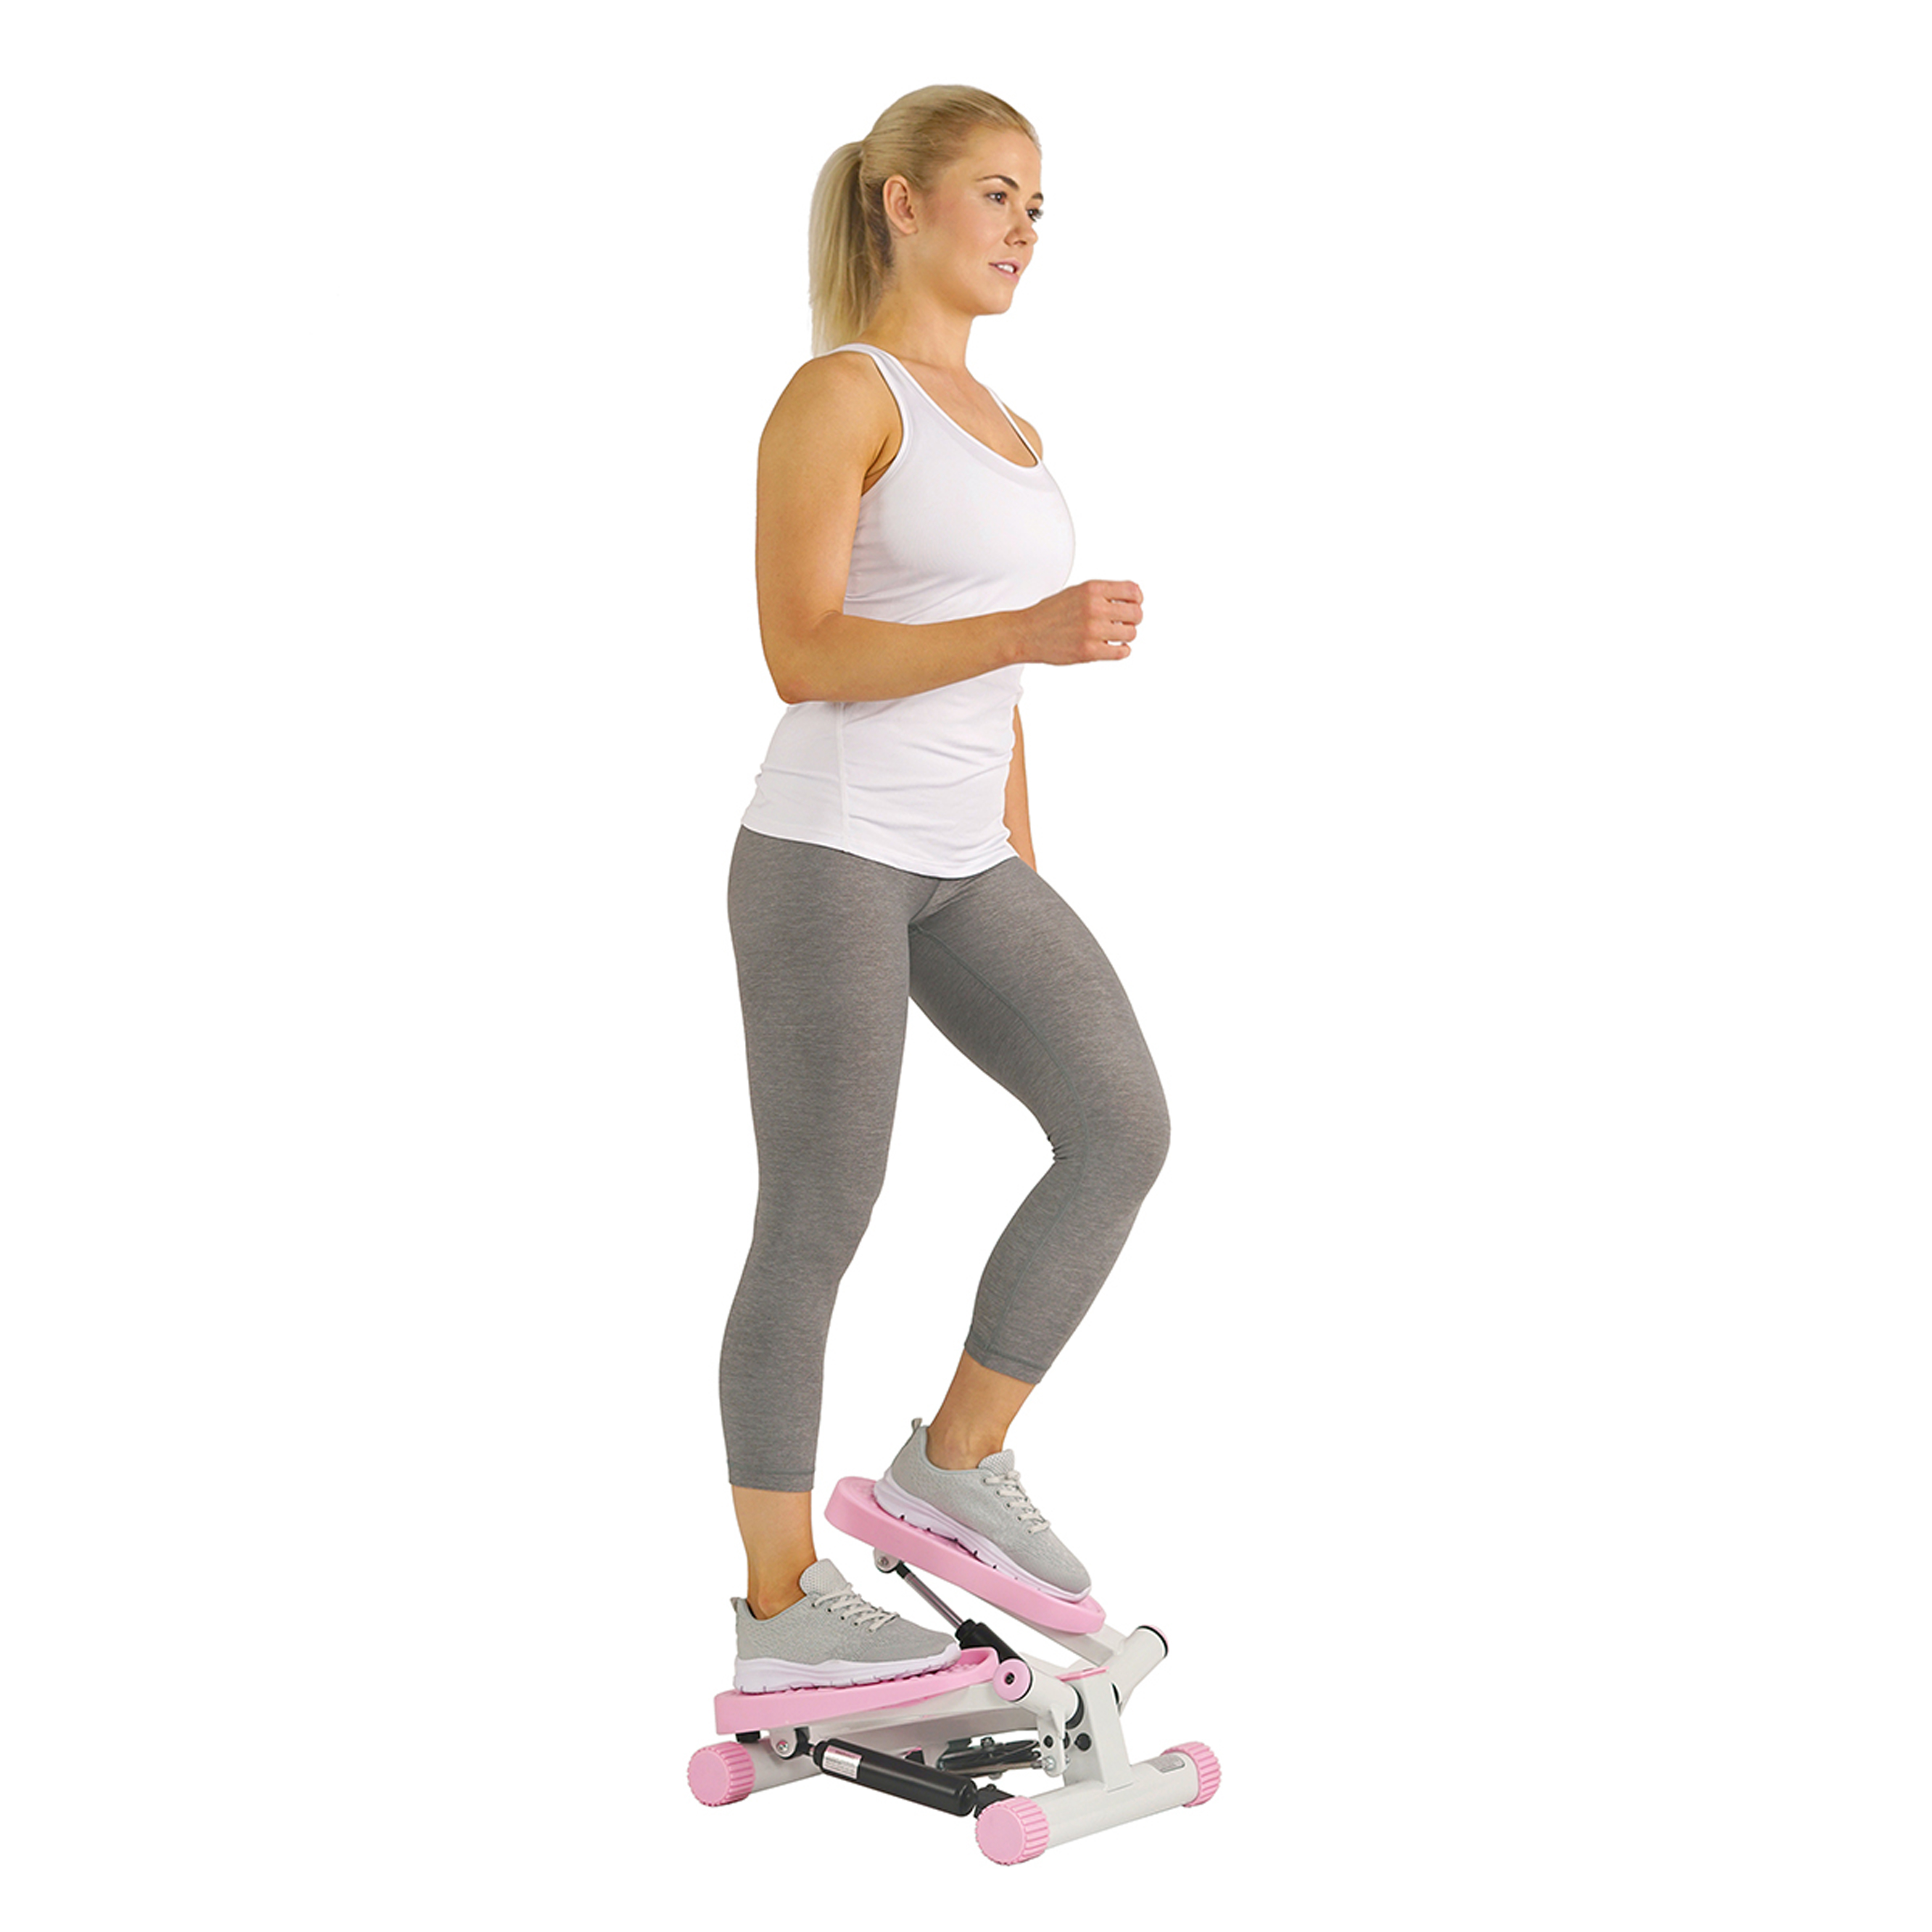 Sunny Health & Fitness Pink Adjustable Twist Stepper Machine w/ LCD Monitor - Mini Stair Stepper for at Home Exercise, P8000 - image 1 of 9